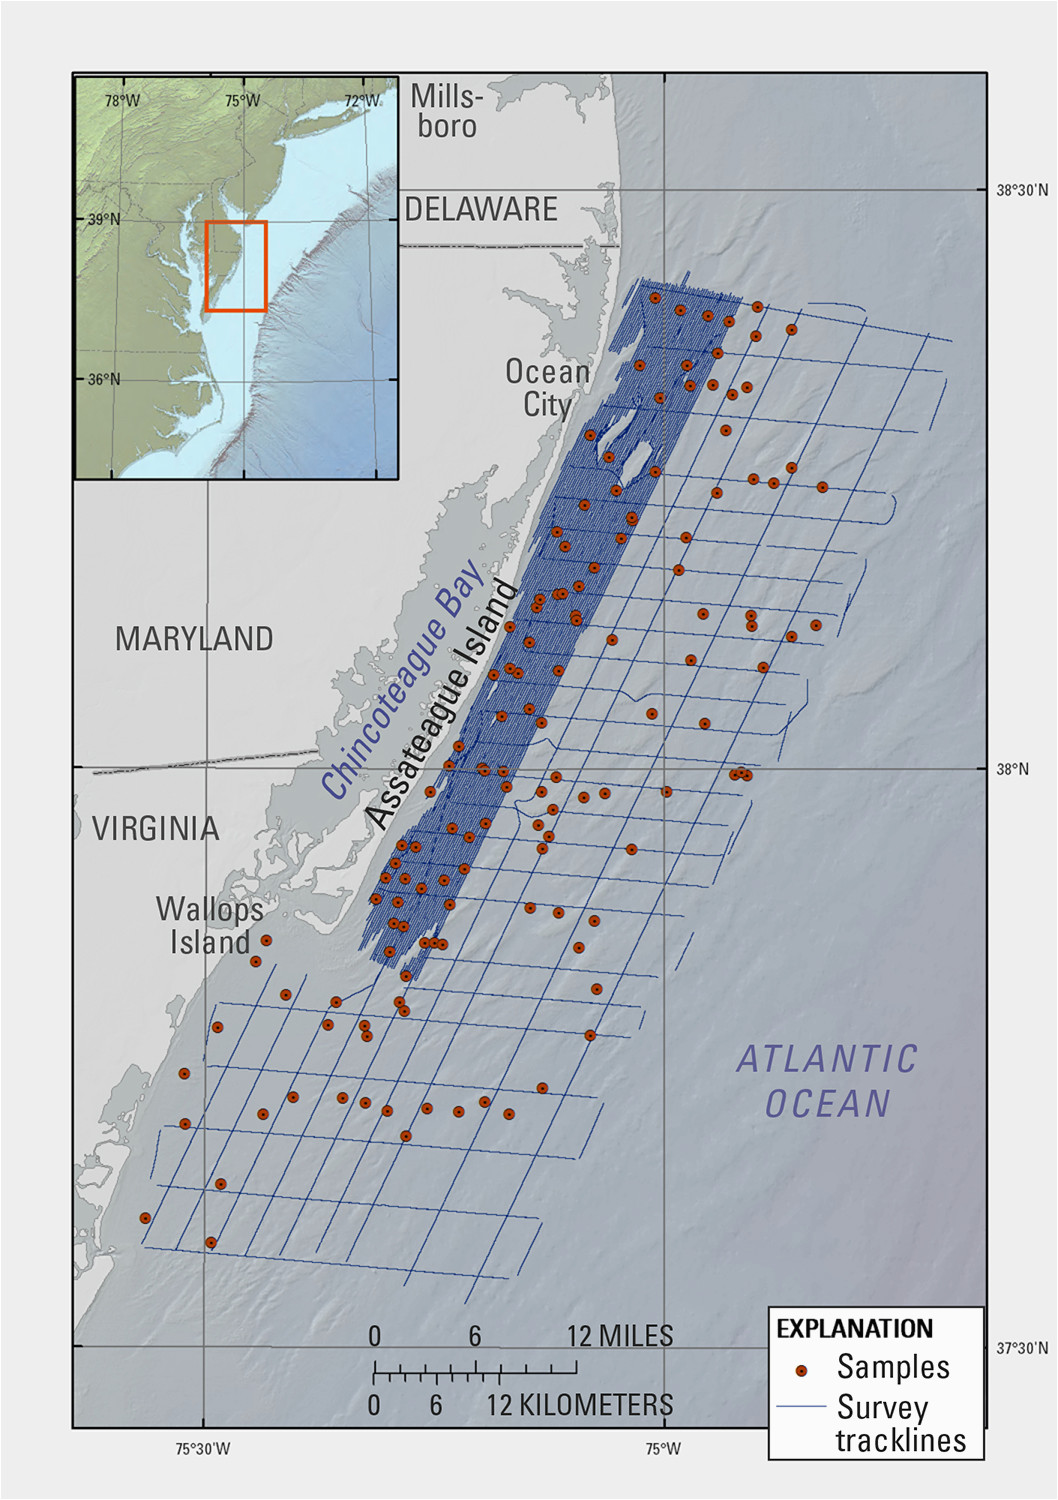 usgs scientists conduct comprehensive seafloor mapping off the